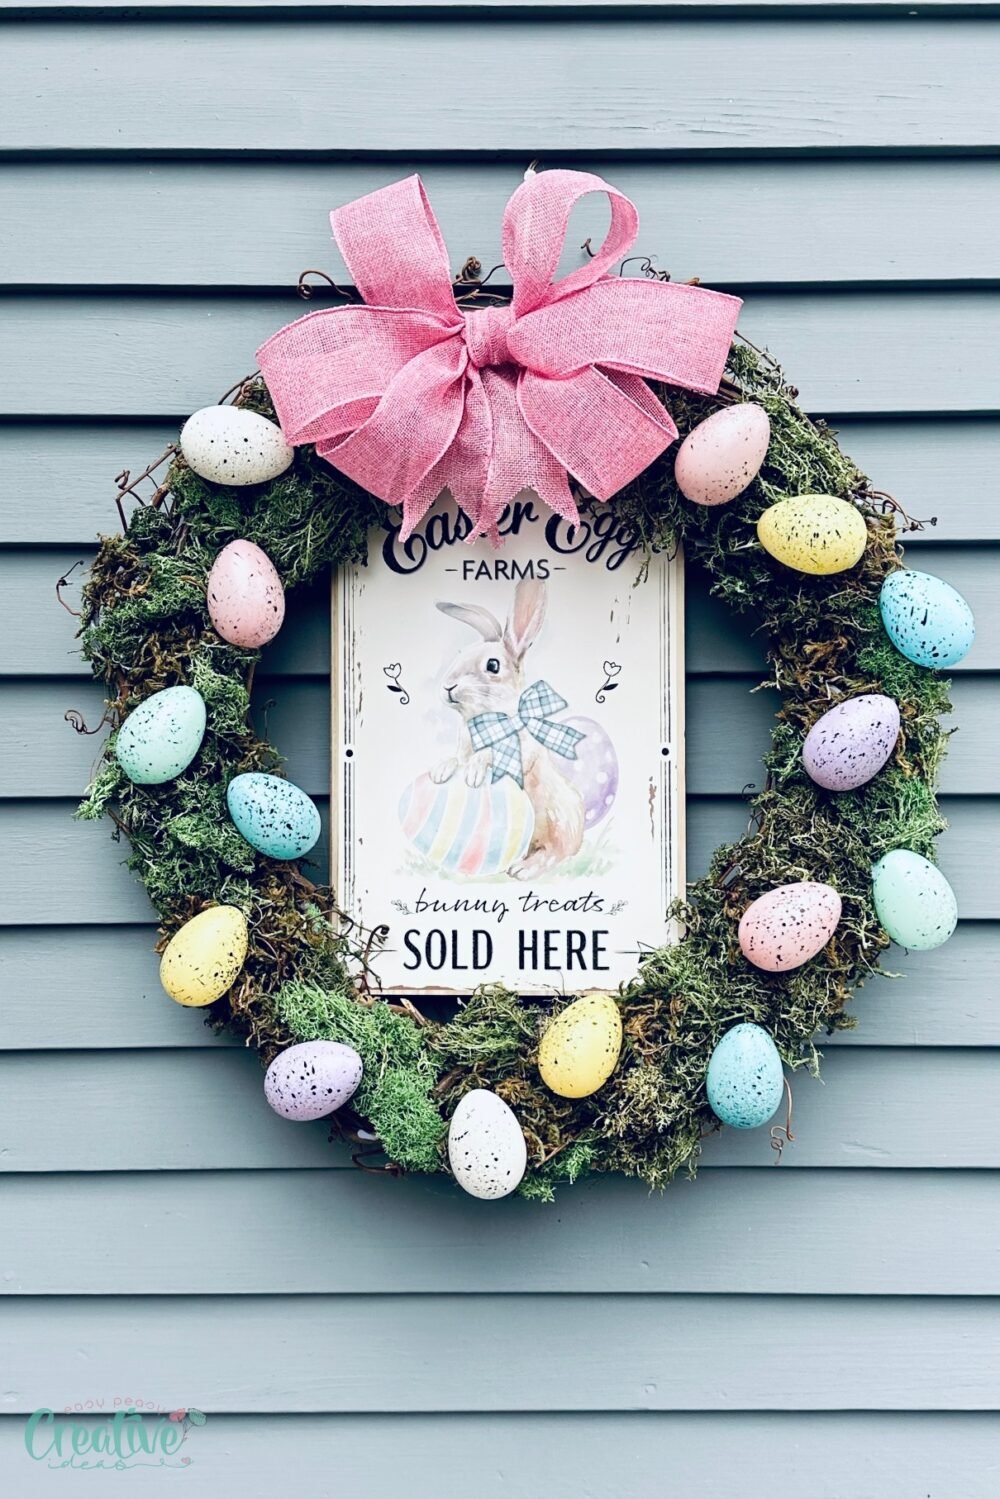 Festive Easter egg wreath adorned with eggs and a sign, ideal for holiday celebrations.